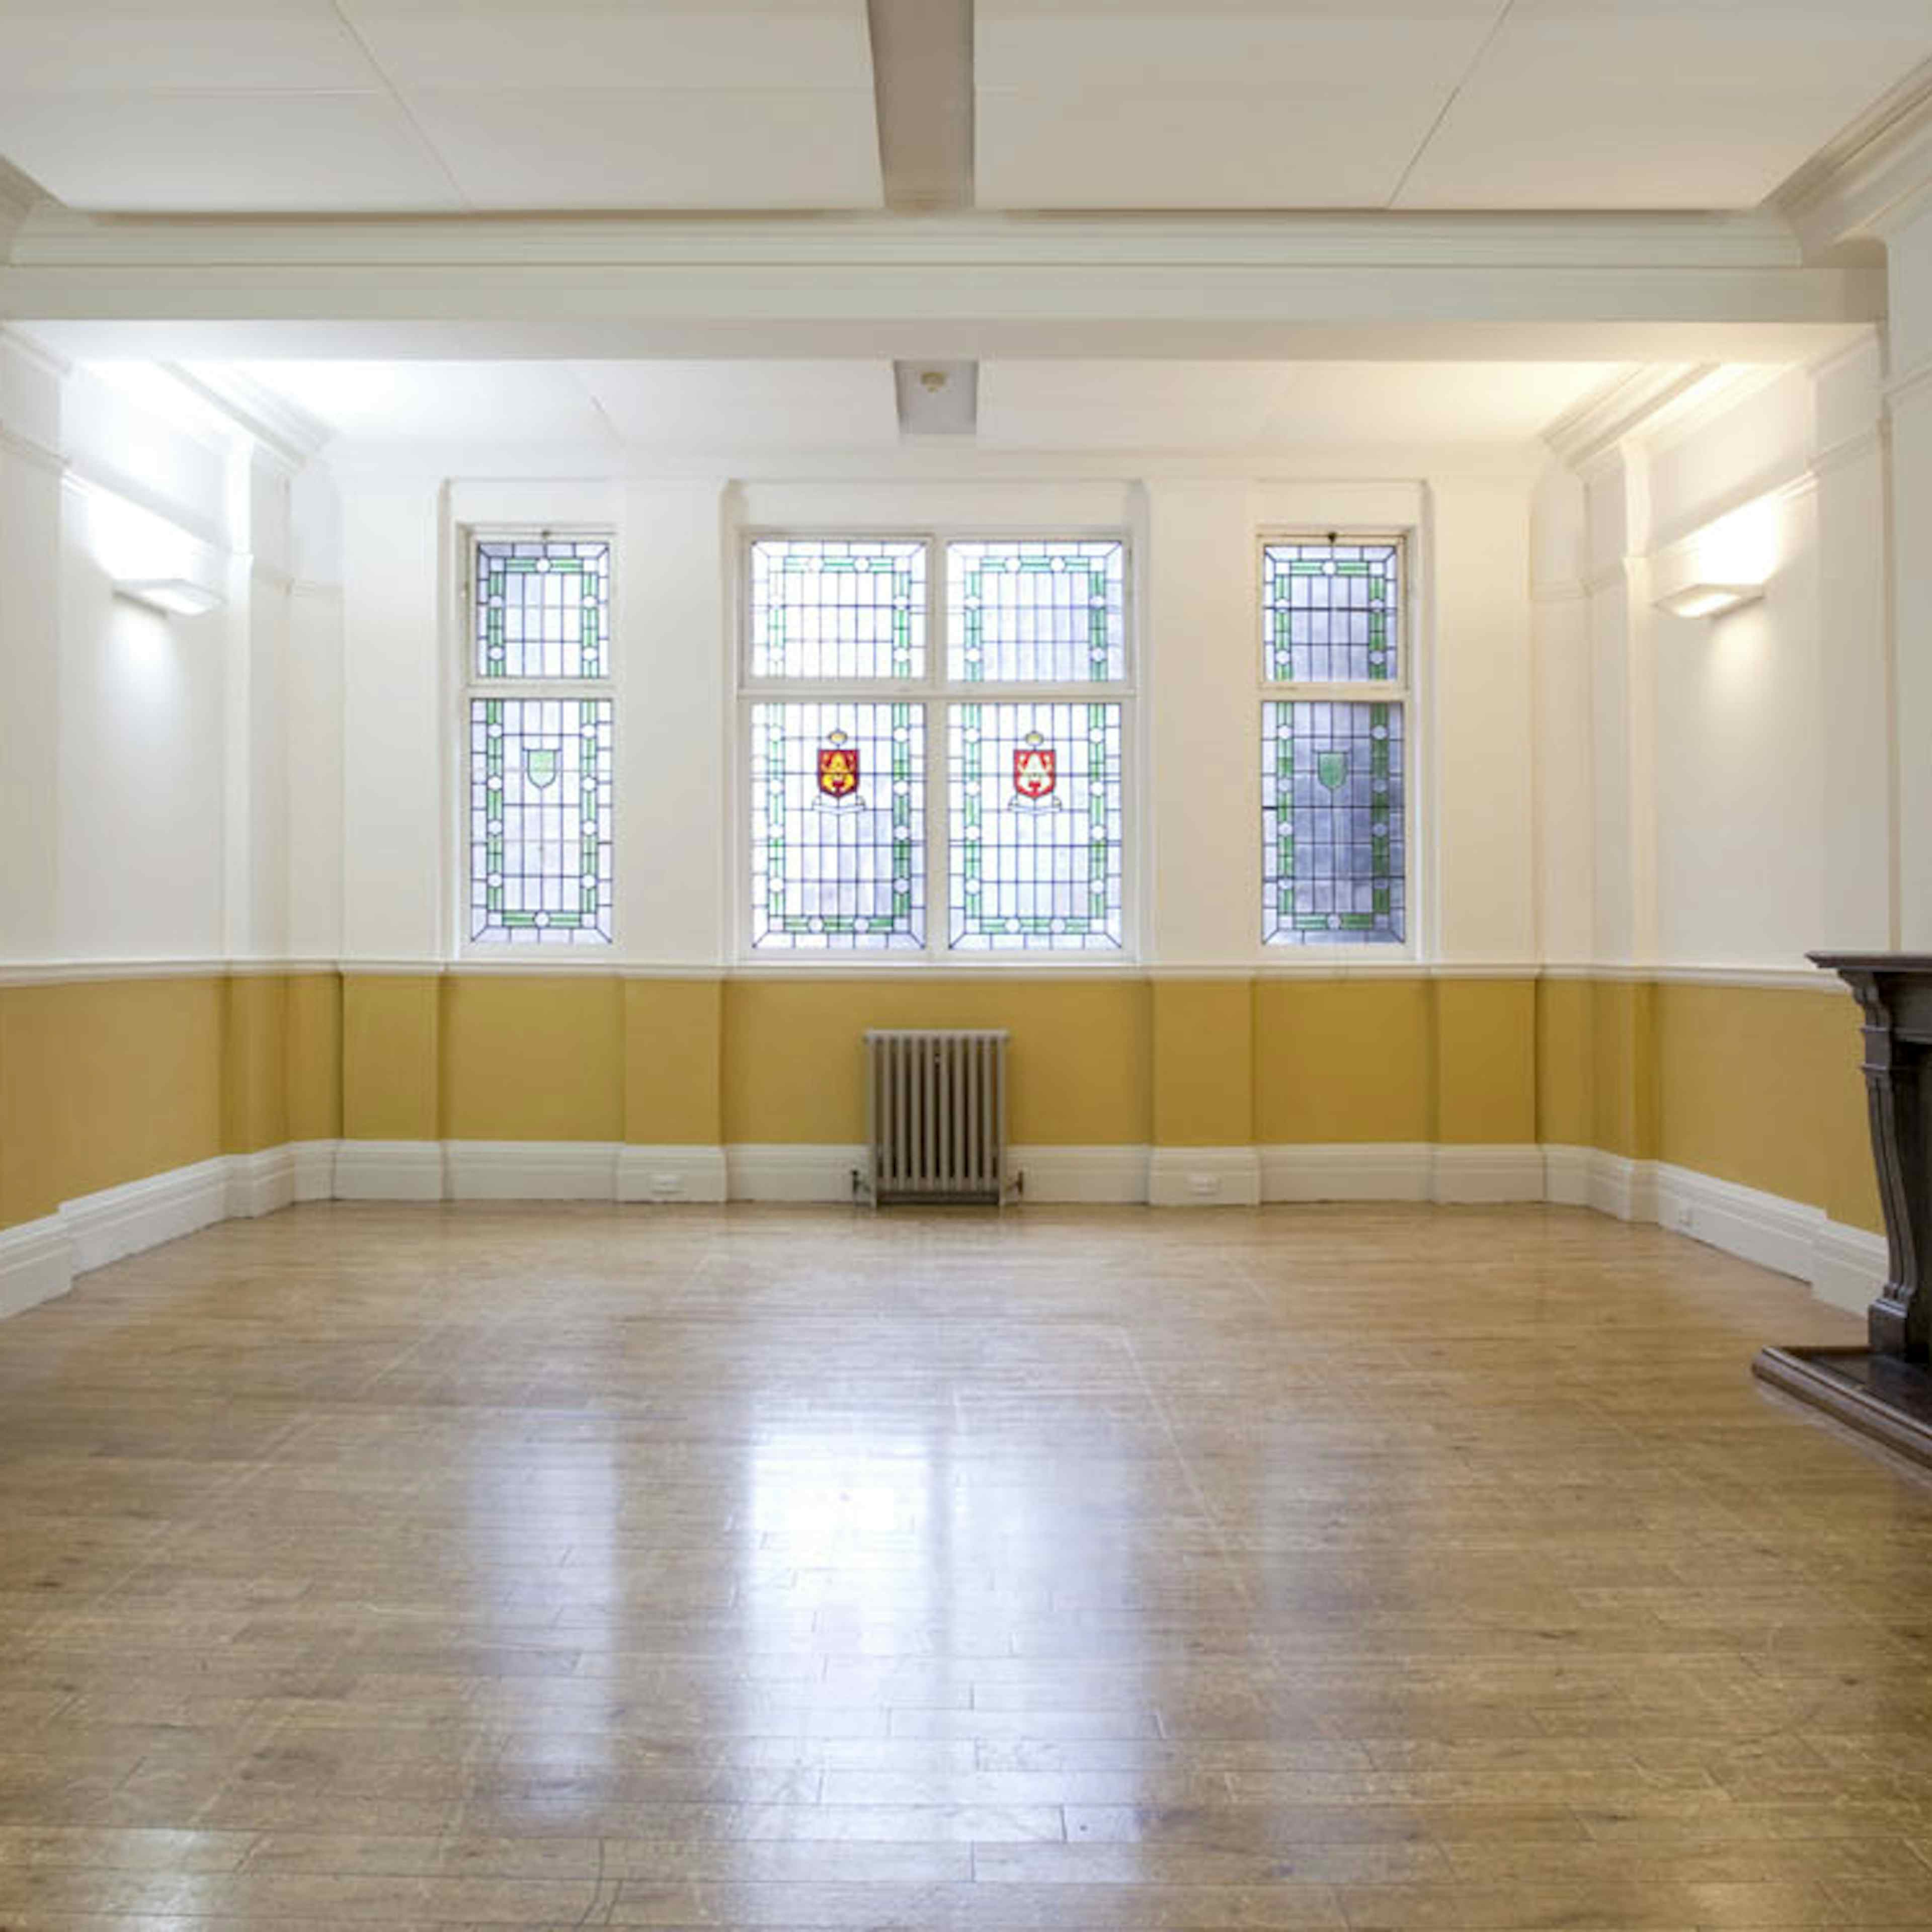 Shoreditch Town Hall - Mayor's Parlour image 2